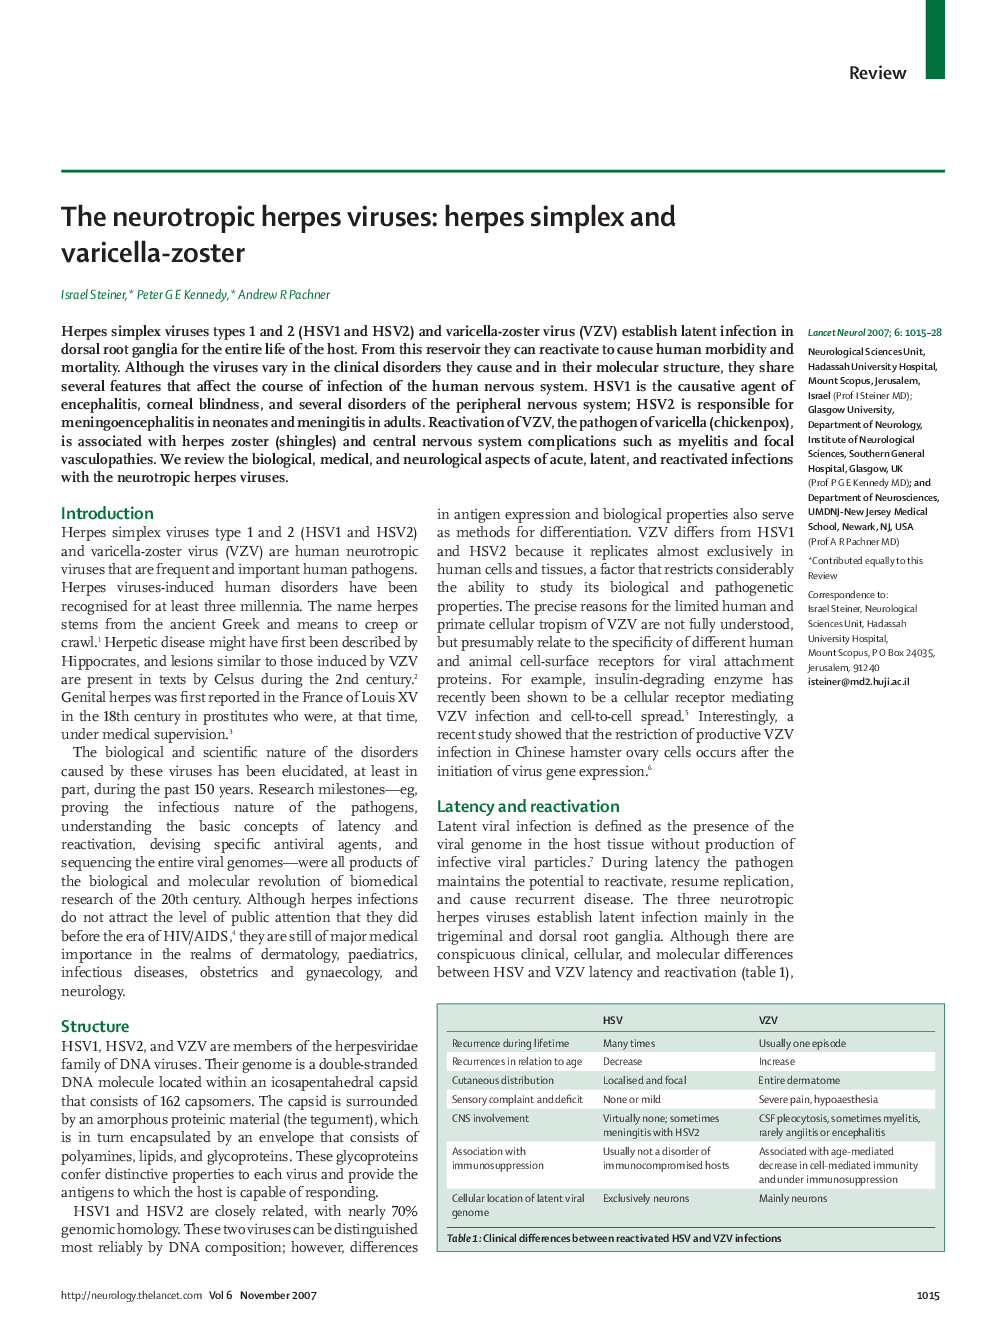 The neurotropic herpes viruses: herpes simplex and varicella-zoster